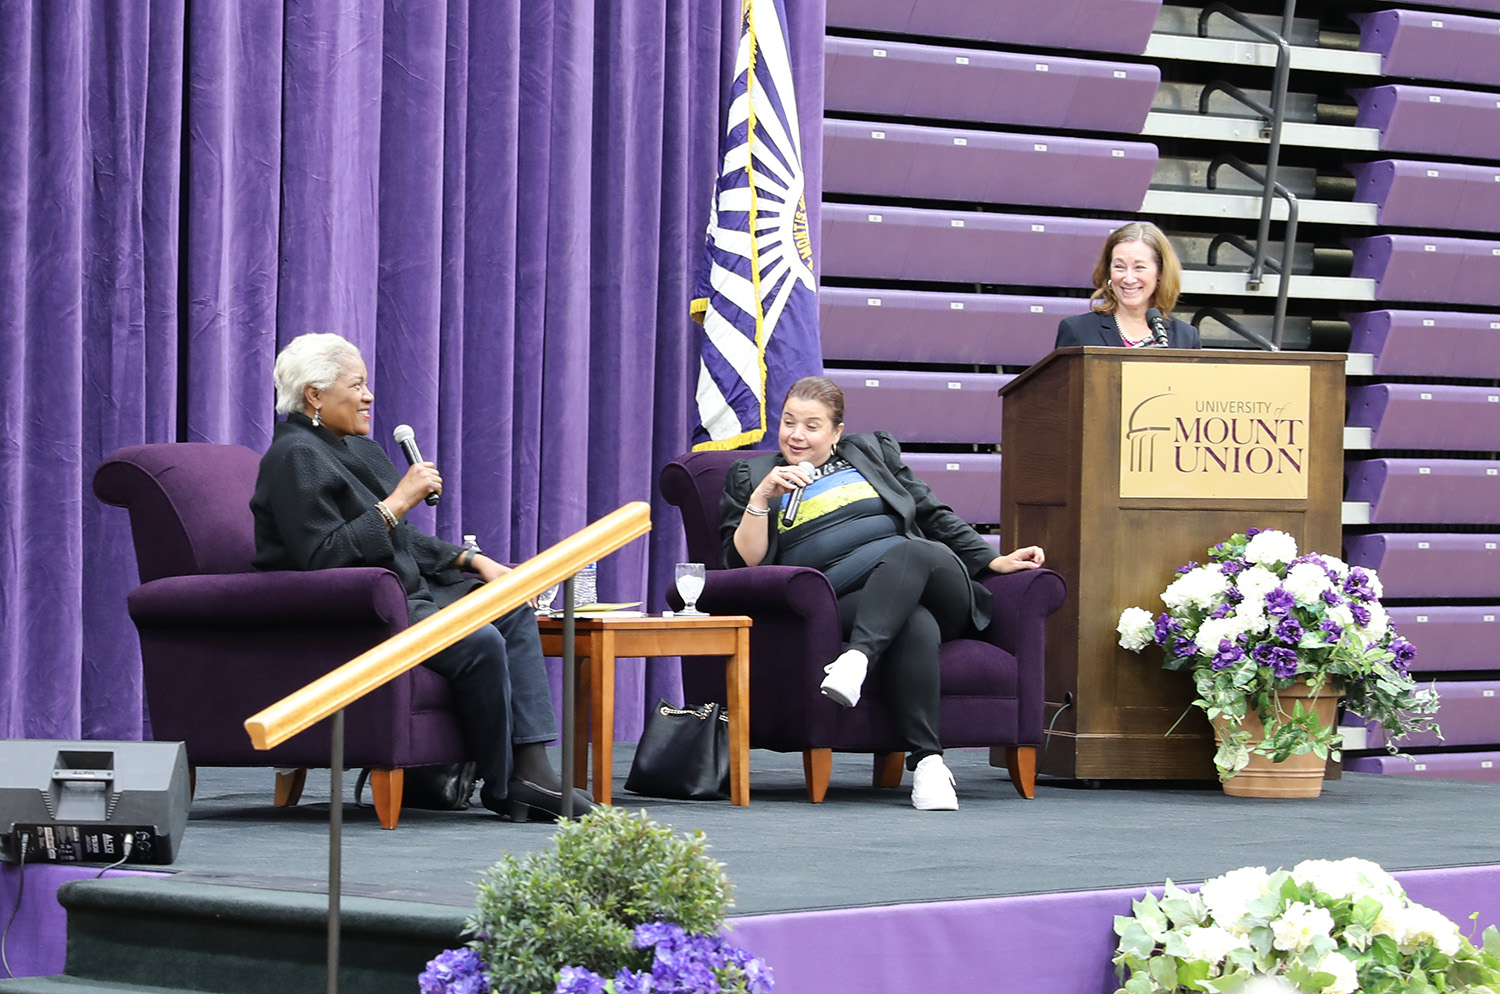 from left to right, donna brazile, ana navarro and dr. jamie capuzza on stage at the 2022 schooler lecture